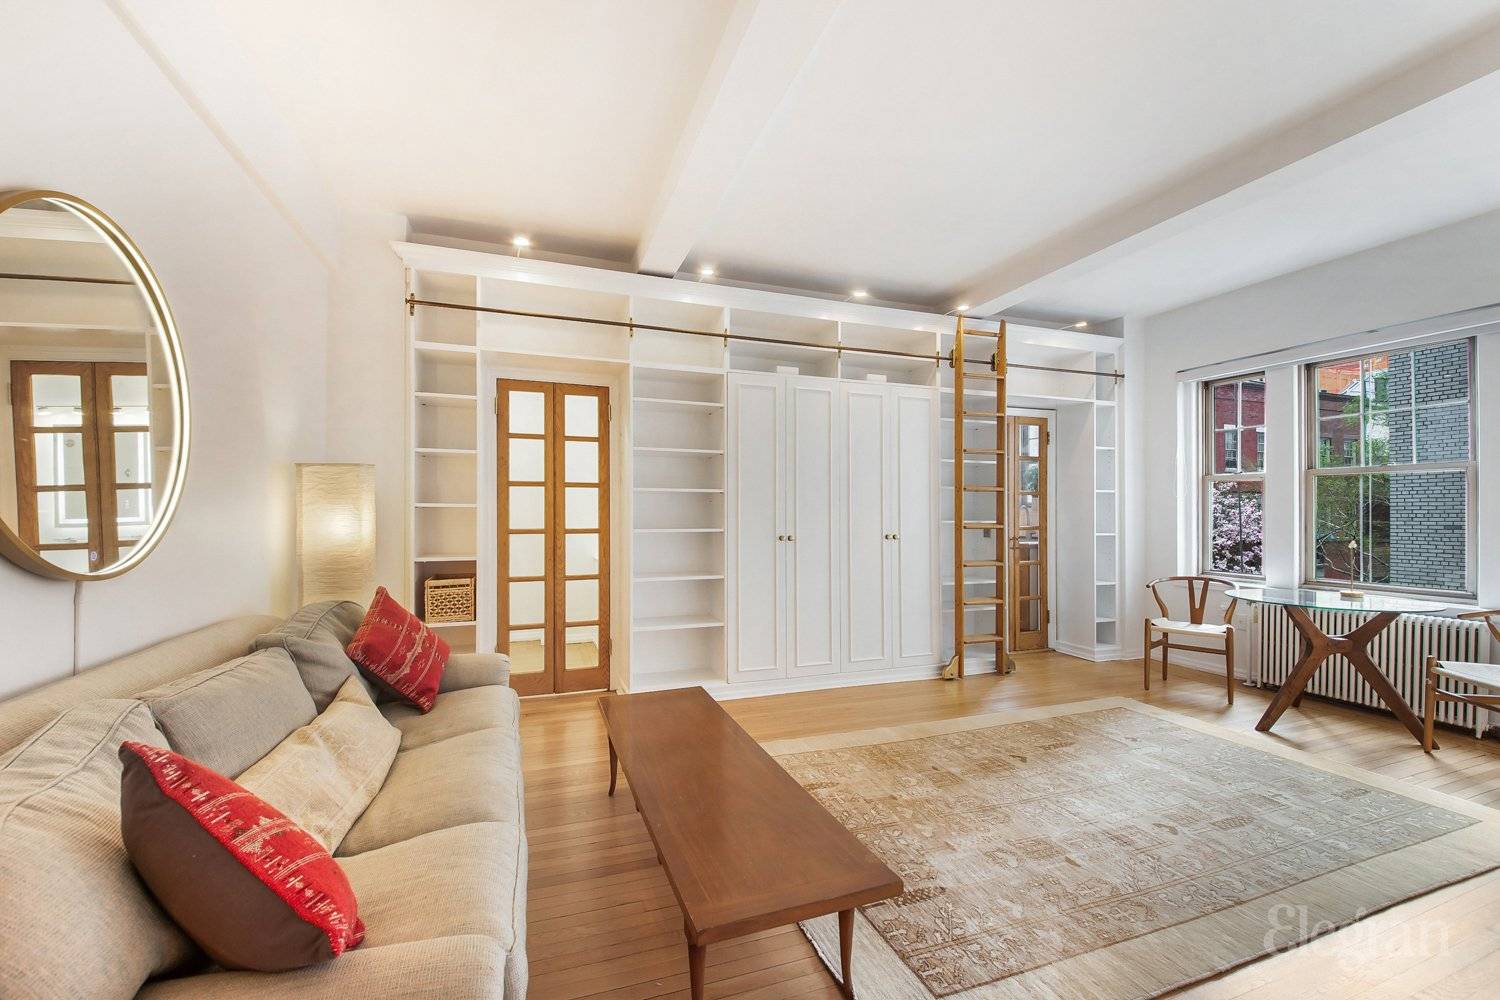 Lowest priced doorman condo anywhere in the West Village or SoHo !